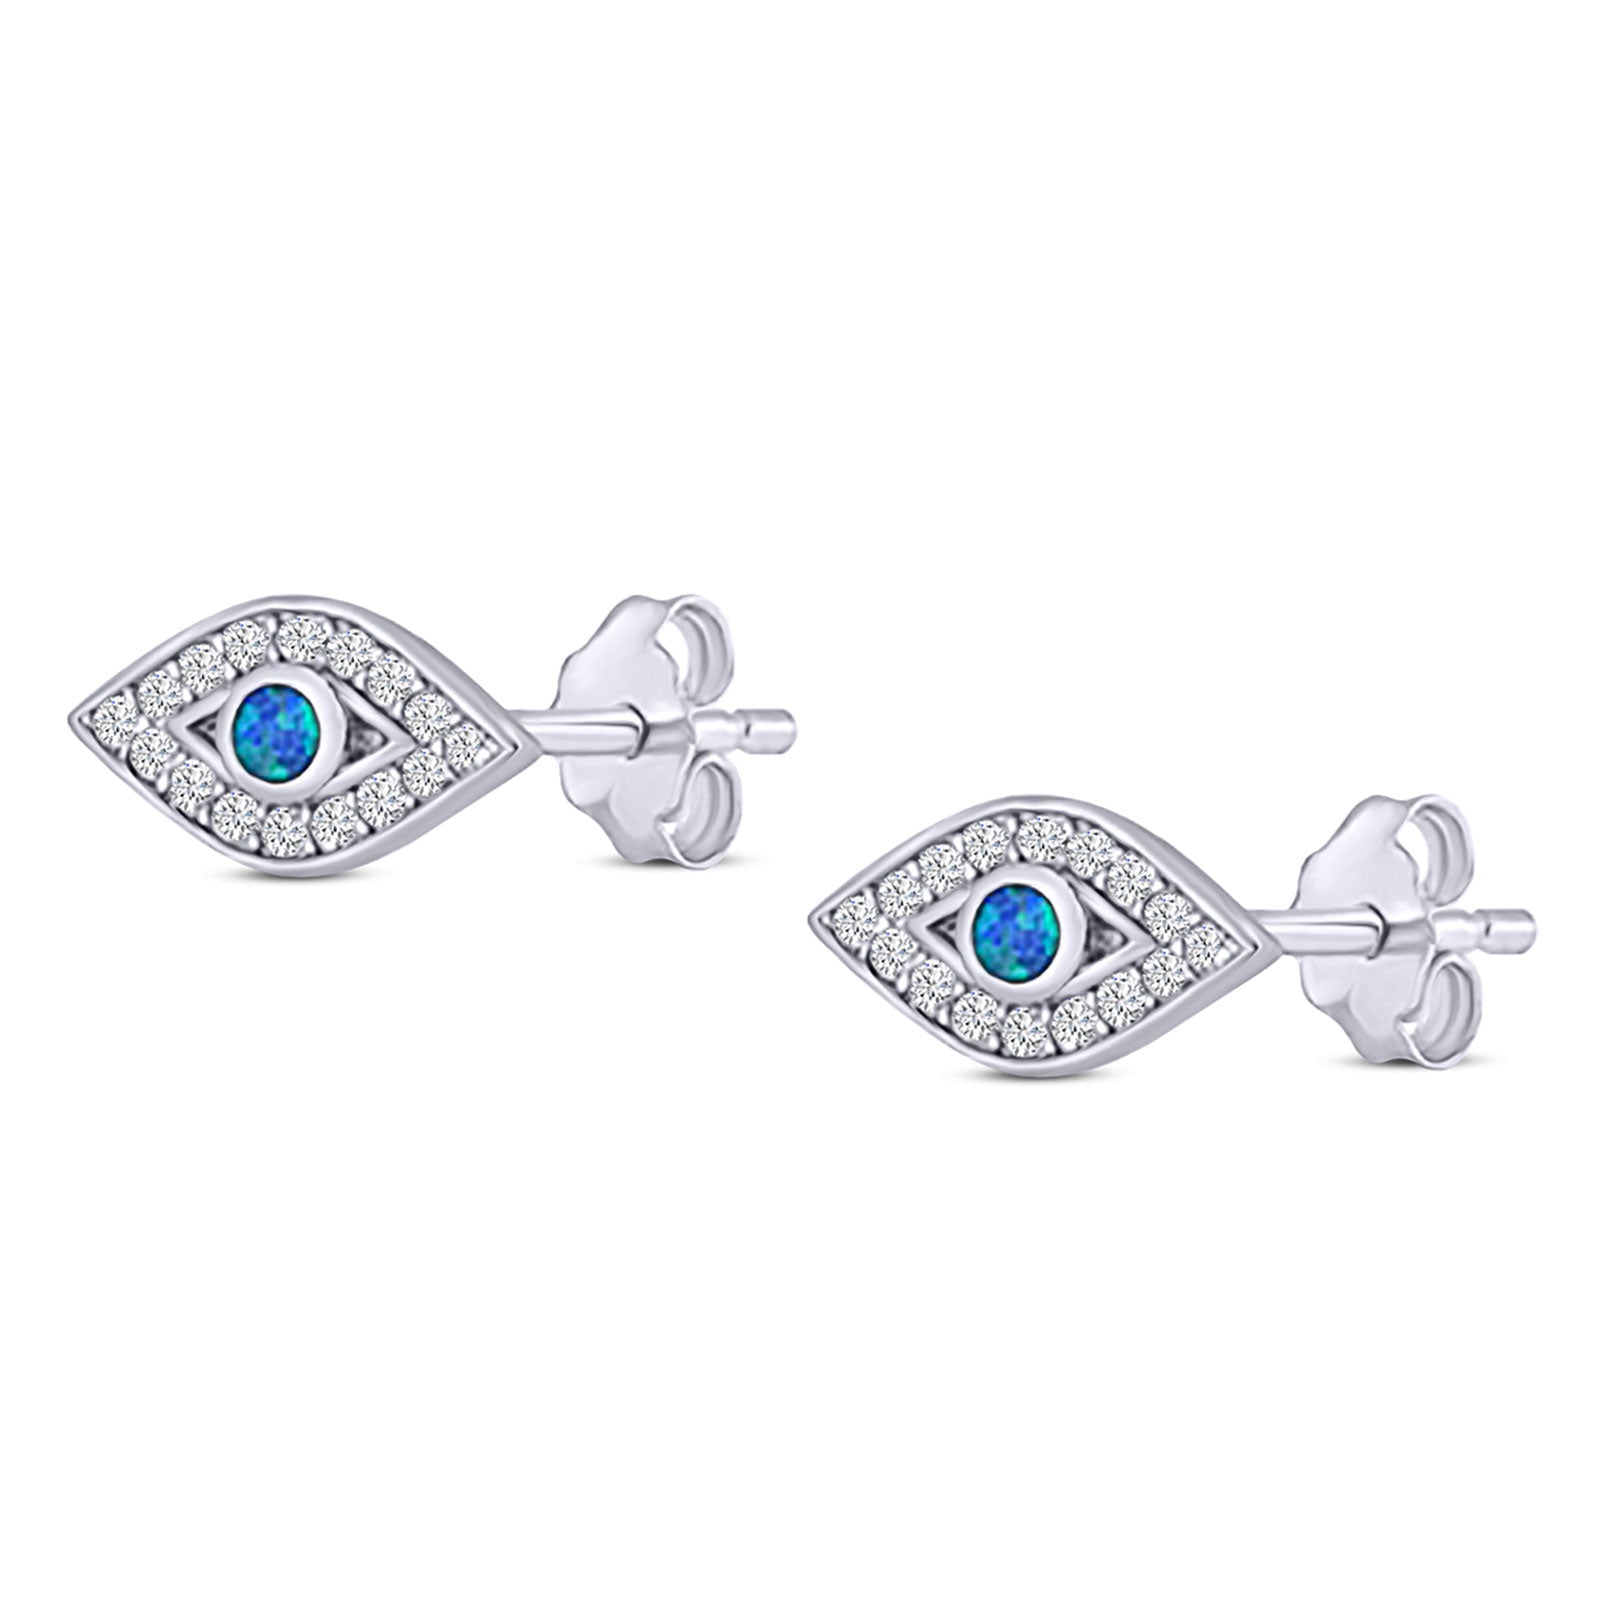 Halo Eye Stud Earring Simulated Cubic Zirconia Created Blue Opal Solid 925 Sterling Silver (5.8mm)